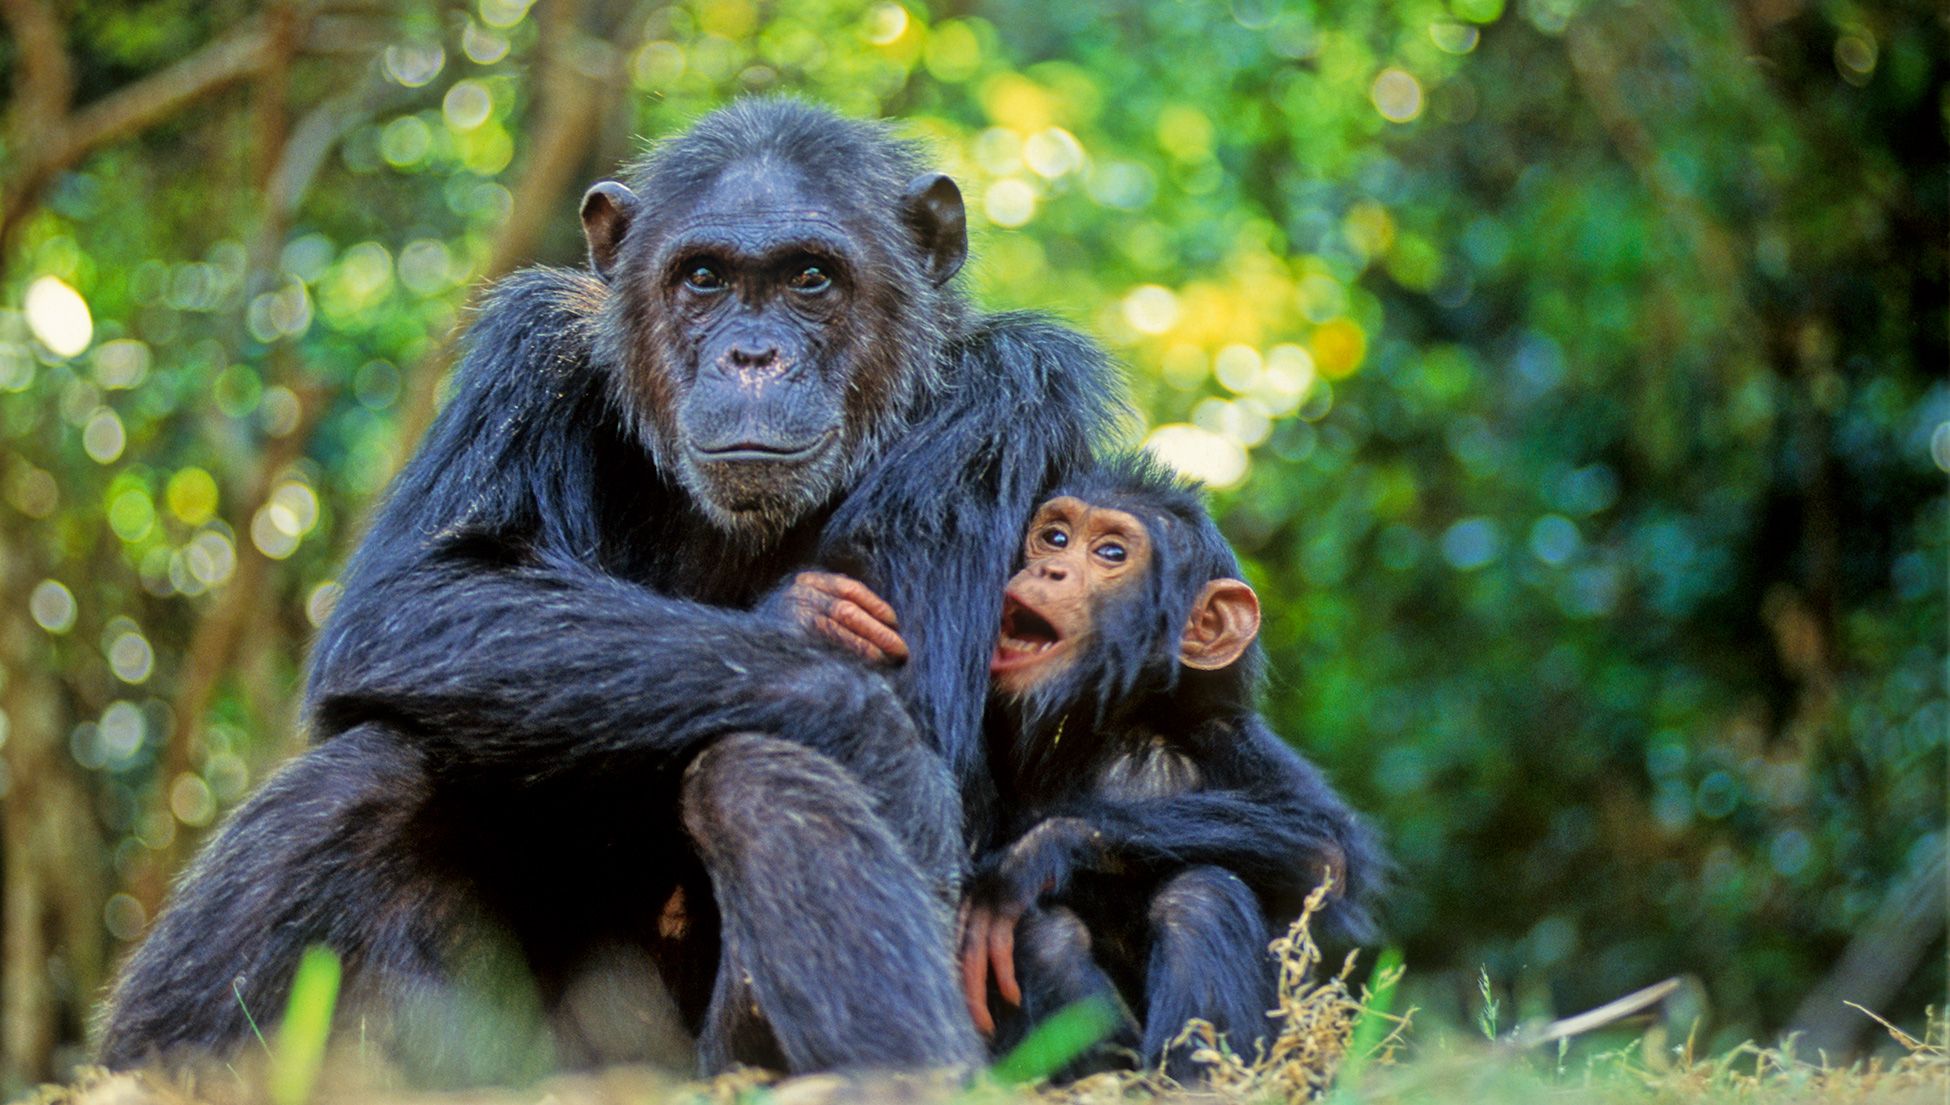 Chimpanzees correct cultural biases about how good mothers behave | Psyche